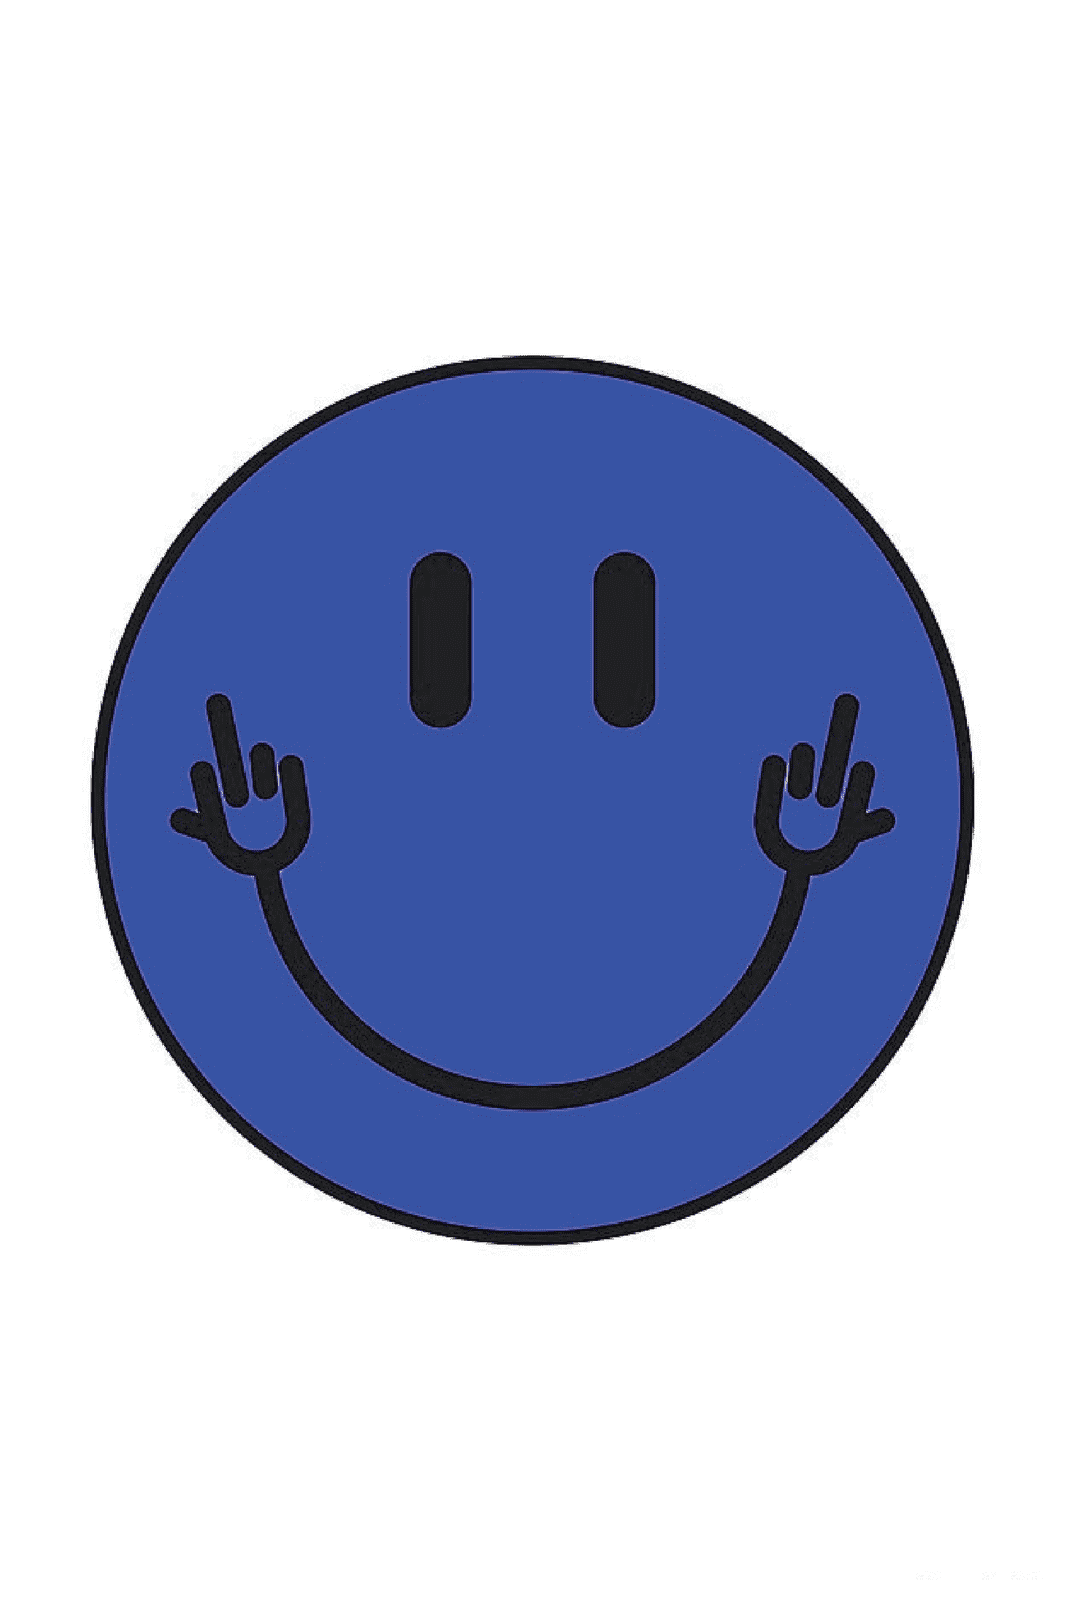 SMILEY POSTER IN MULTIPLE COLORS - PosterFi